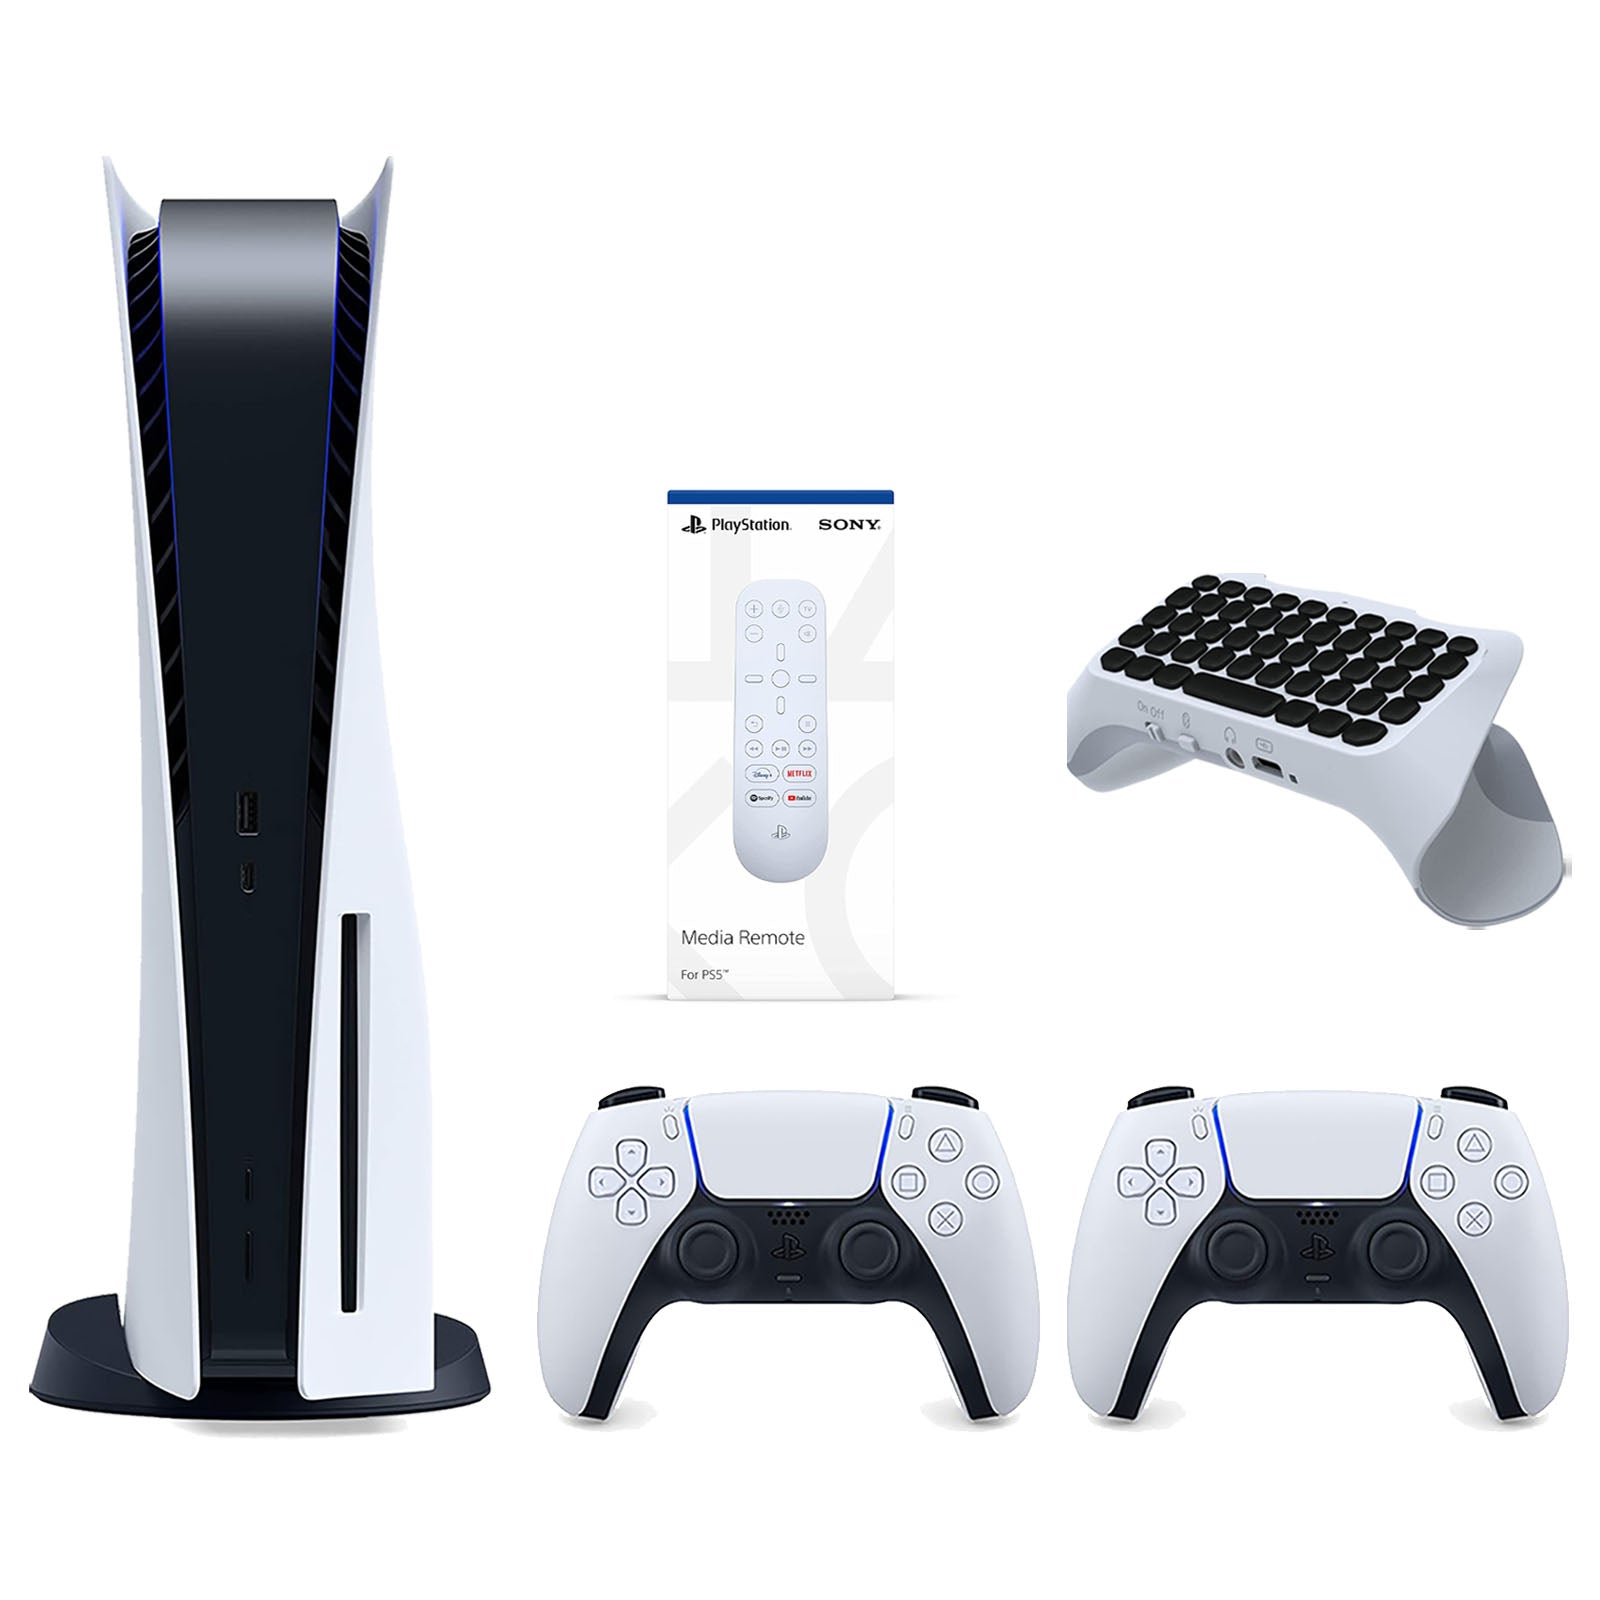 Sony Playstation 5 Disc Version Console with Extra White Controller, Media Remote and Surge QuickType 2.0 Wireless PS5 Controller Keypad Bundle - Pro-Distributing